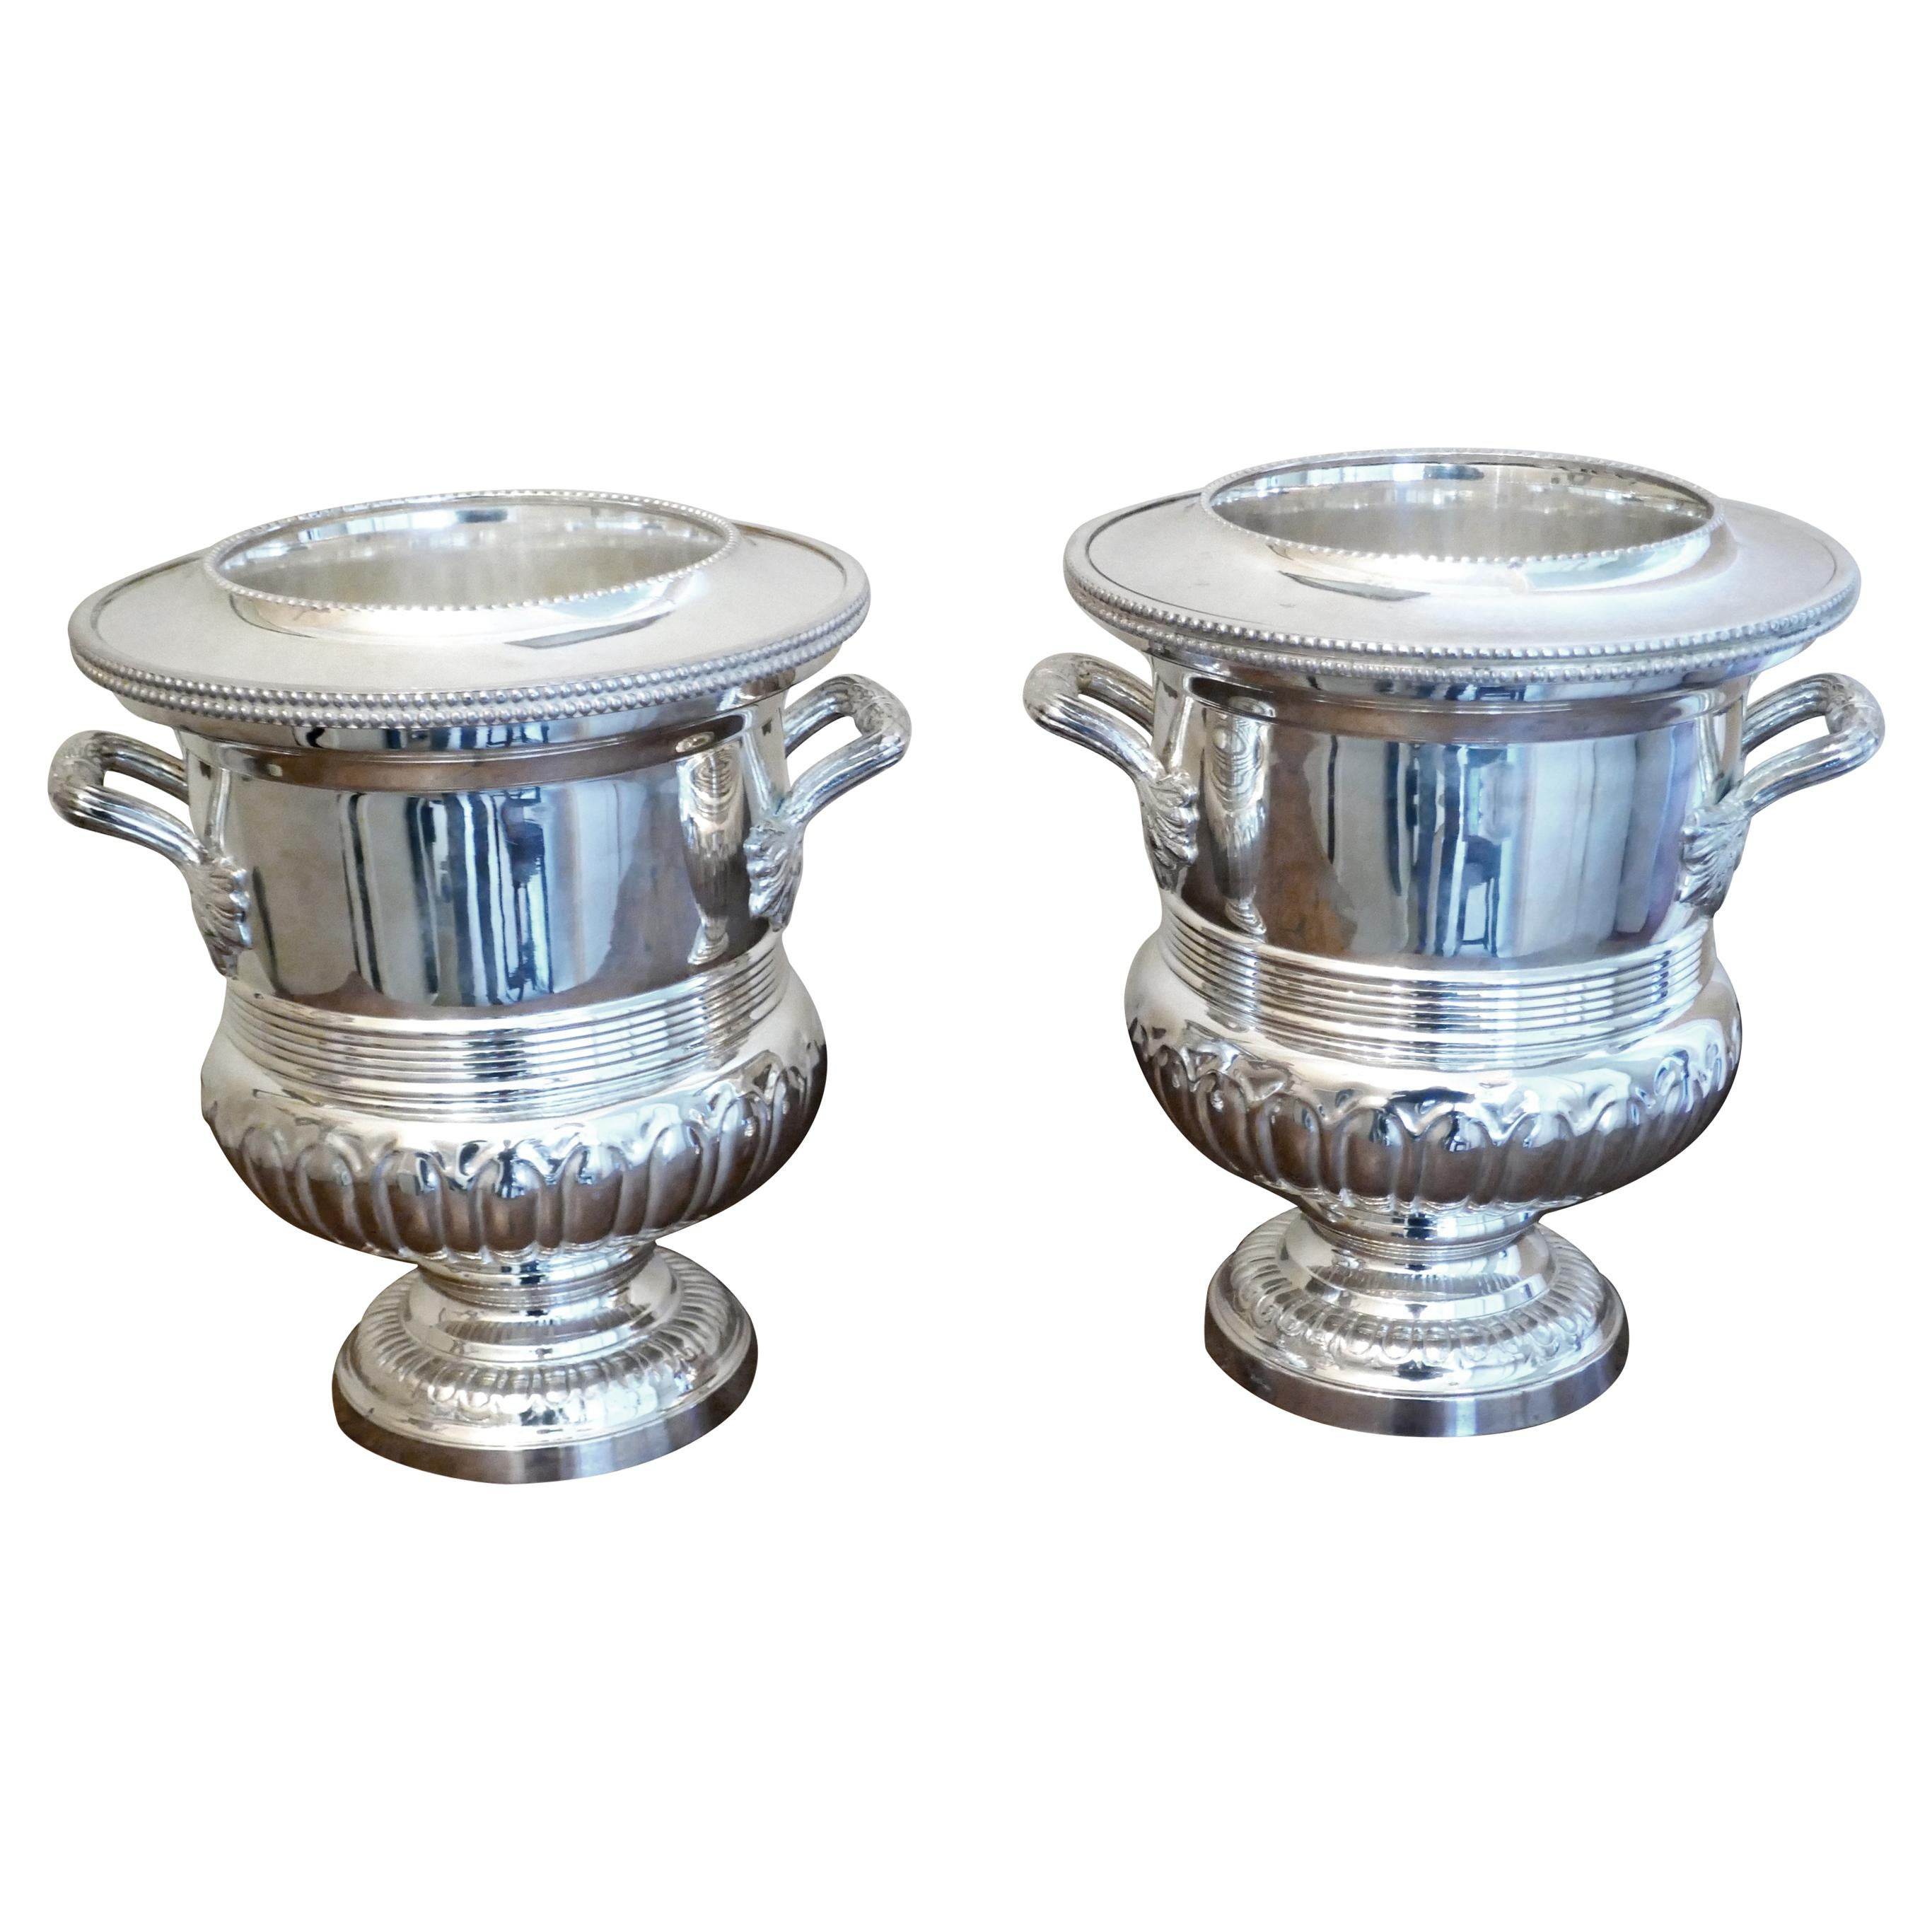 Fine Pair of Campana Style Wine Coolers, Champagne Ice Buckets